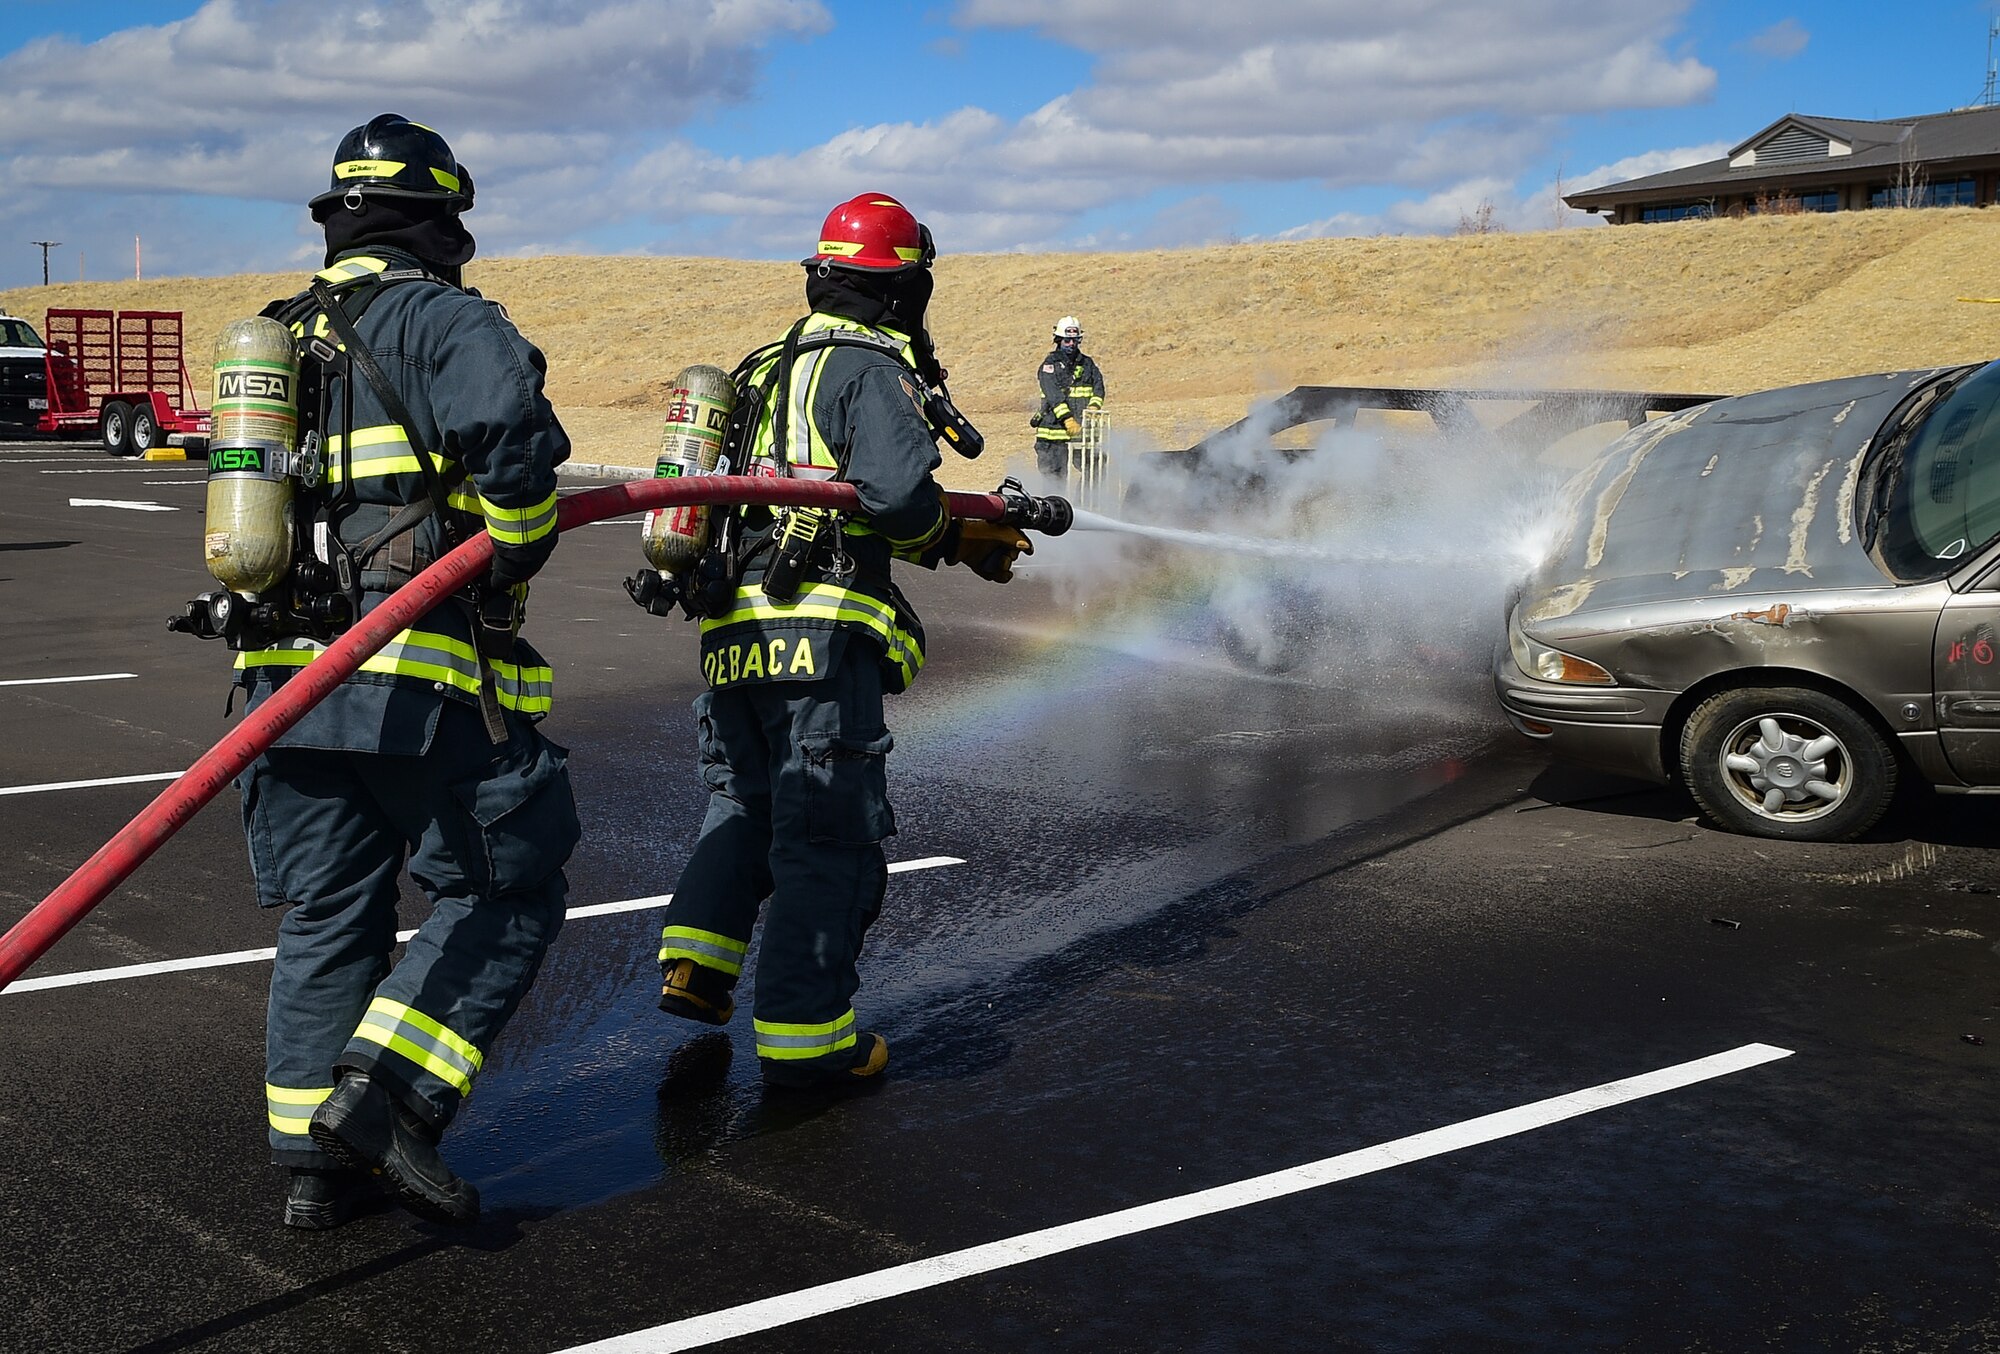 Fire Lt. Christopher Debaca and Dusty Smock, both firefighters from the 460th Civil Engineer Squadron, hose down a burning vehicle during an auto extraction exercise on Buckley Air Force Base, Colo., Feb. 24, 2021.